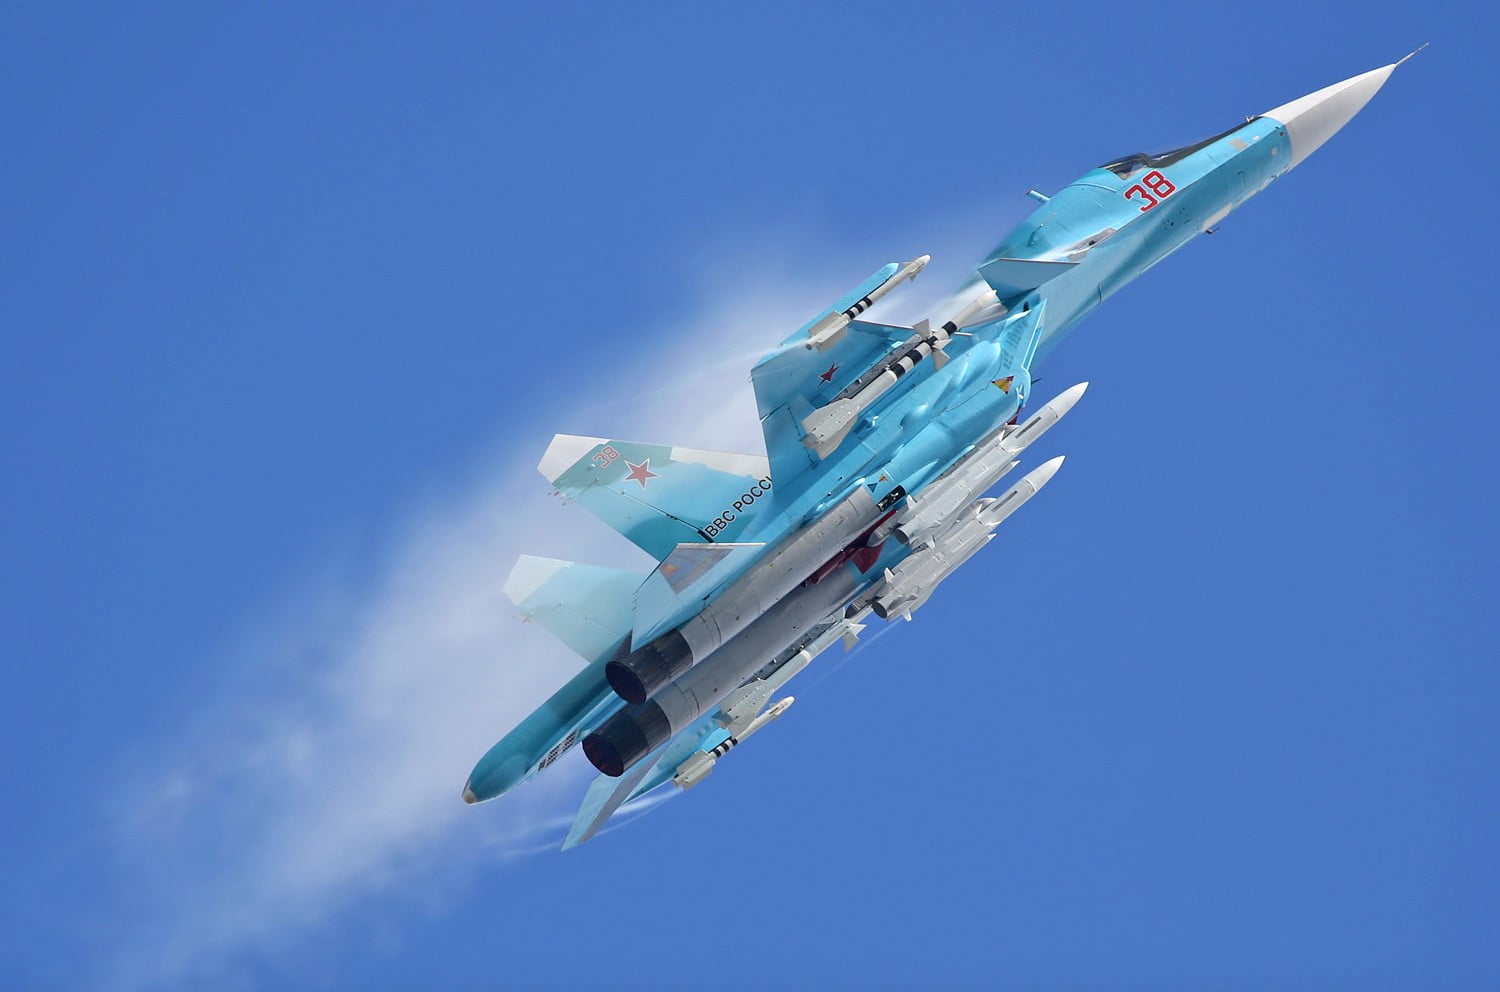 blue fighter plane, Sukhoi Su-34, Sukhoi, Bomber, Russian Air Force